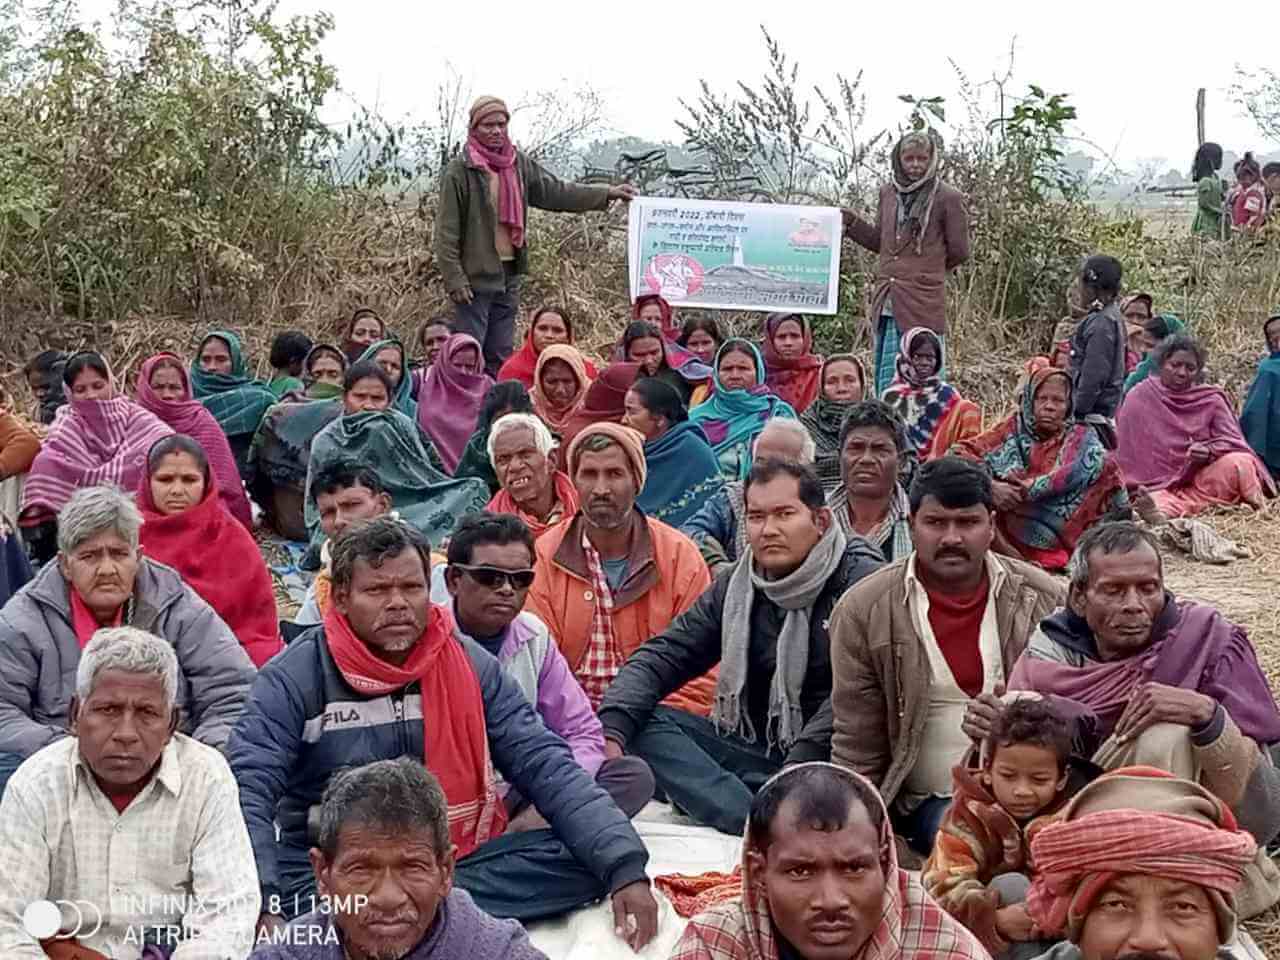 Protests against Attacks on Adivasi Rights